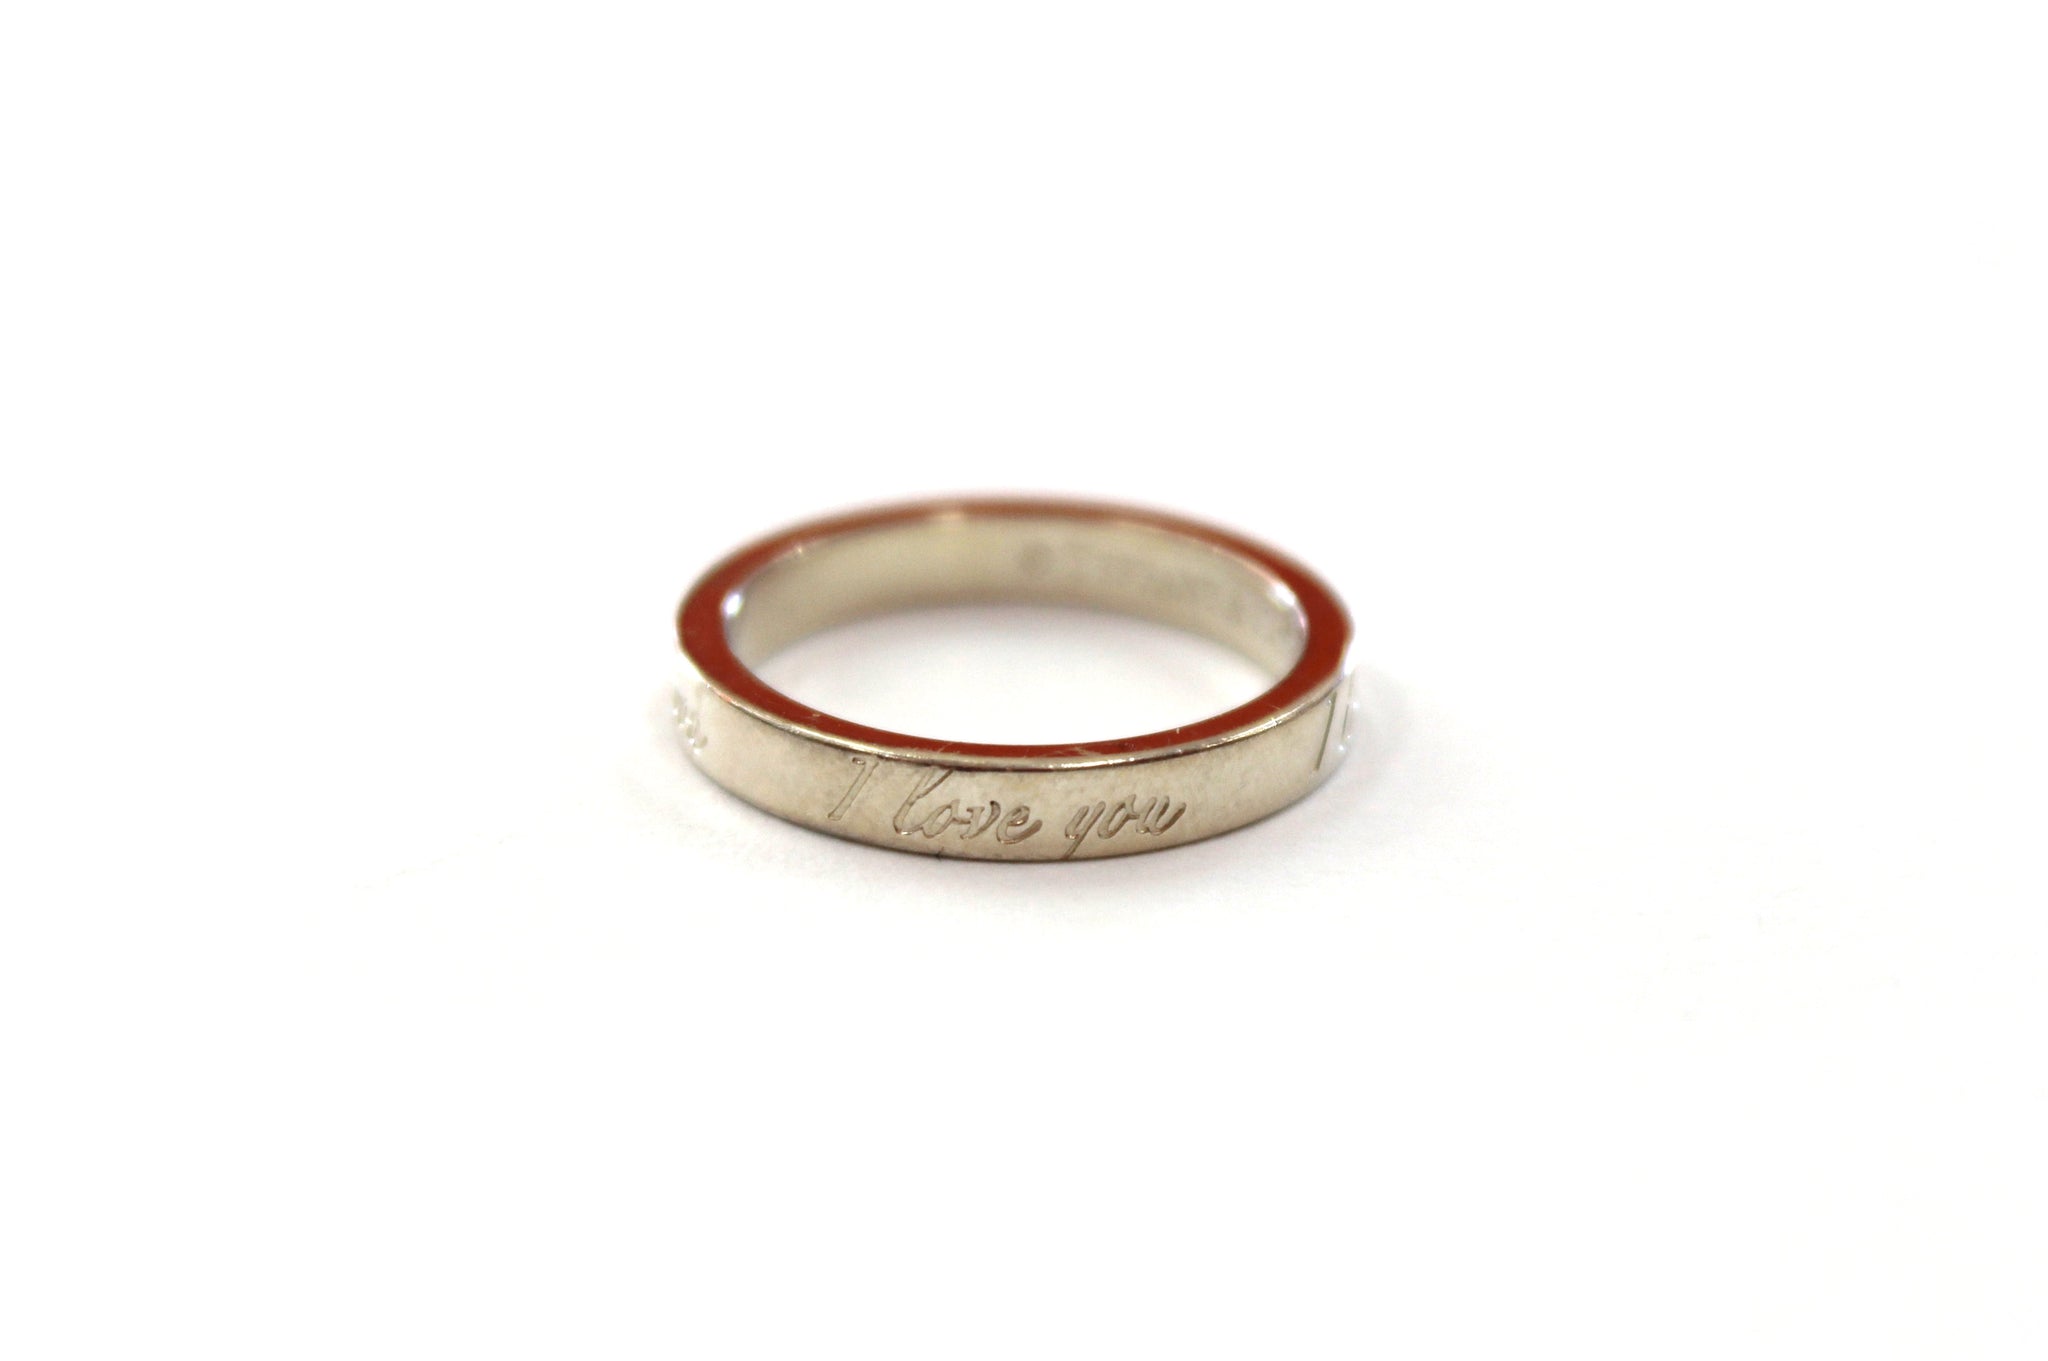 Tiffany & Co. Sterling Silver I love you script band ring size 4.5